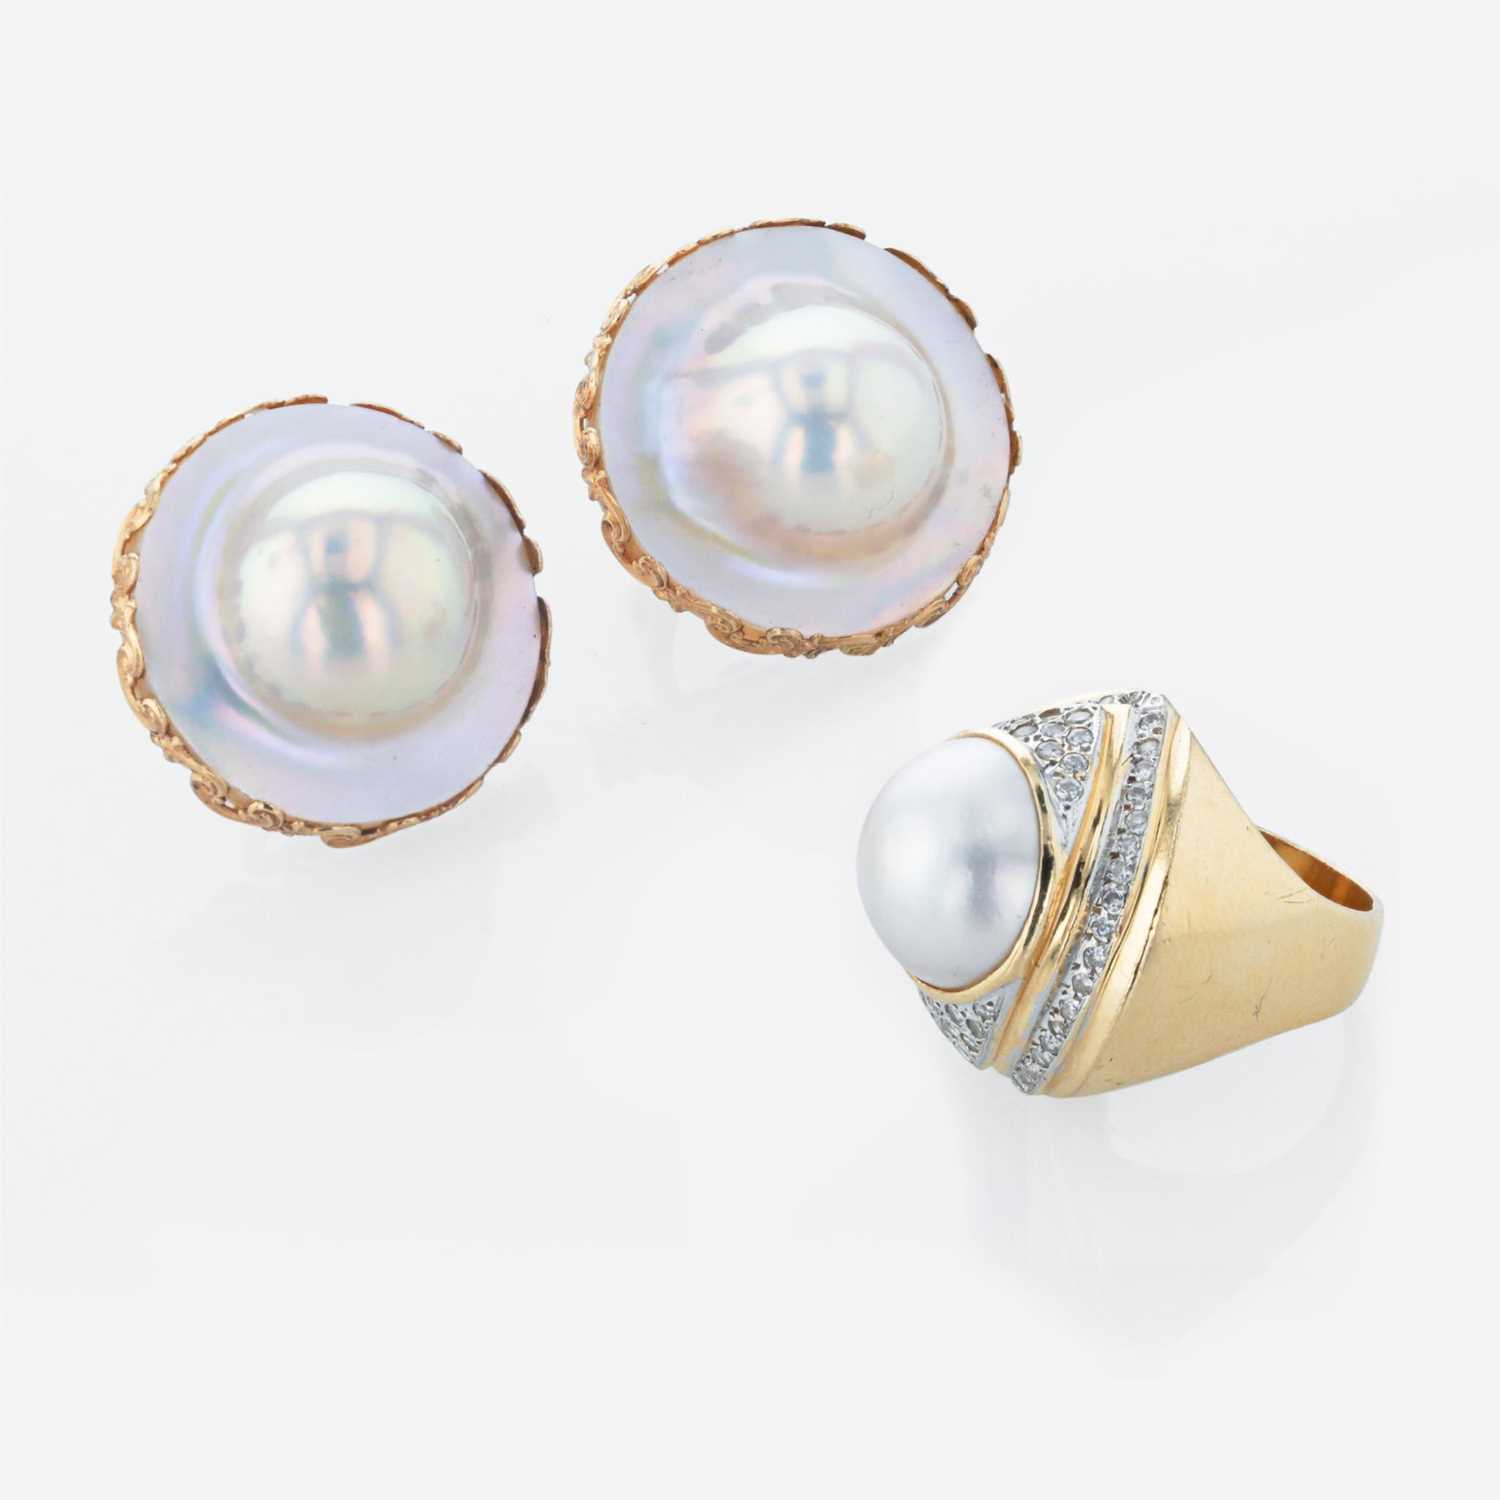 Lot 93 - A 14K yellow gold pair of earrings and pearl and diamond ring